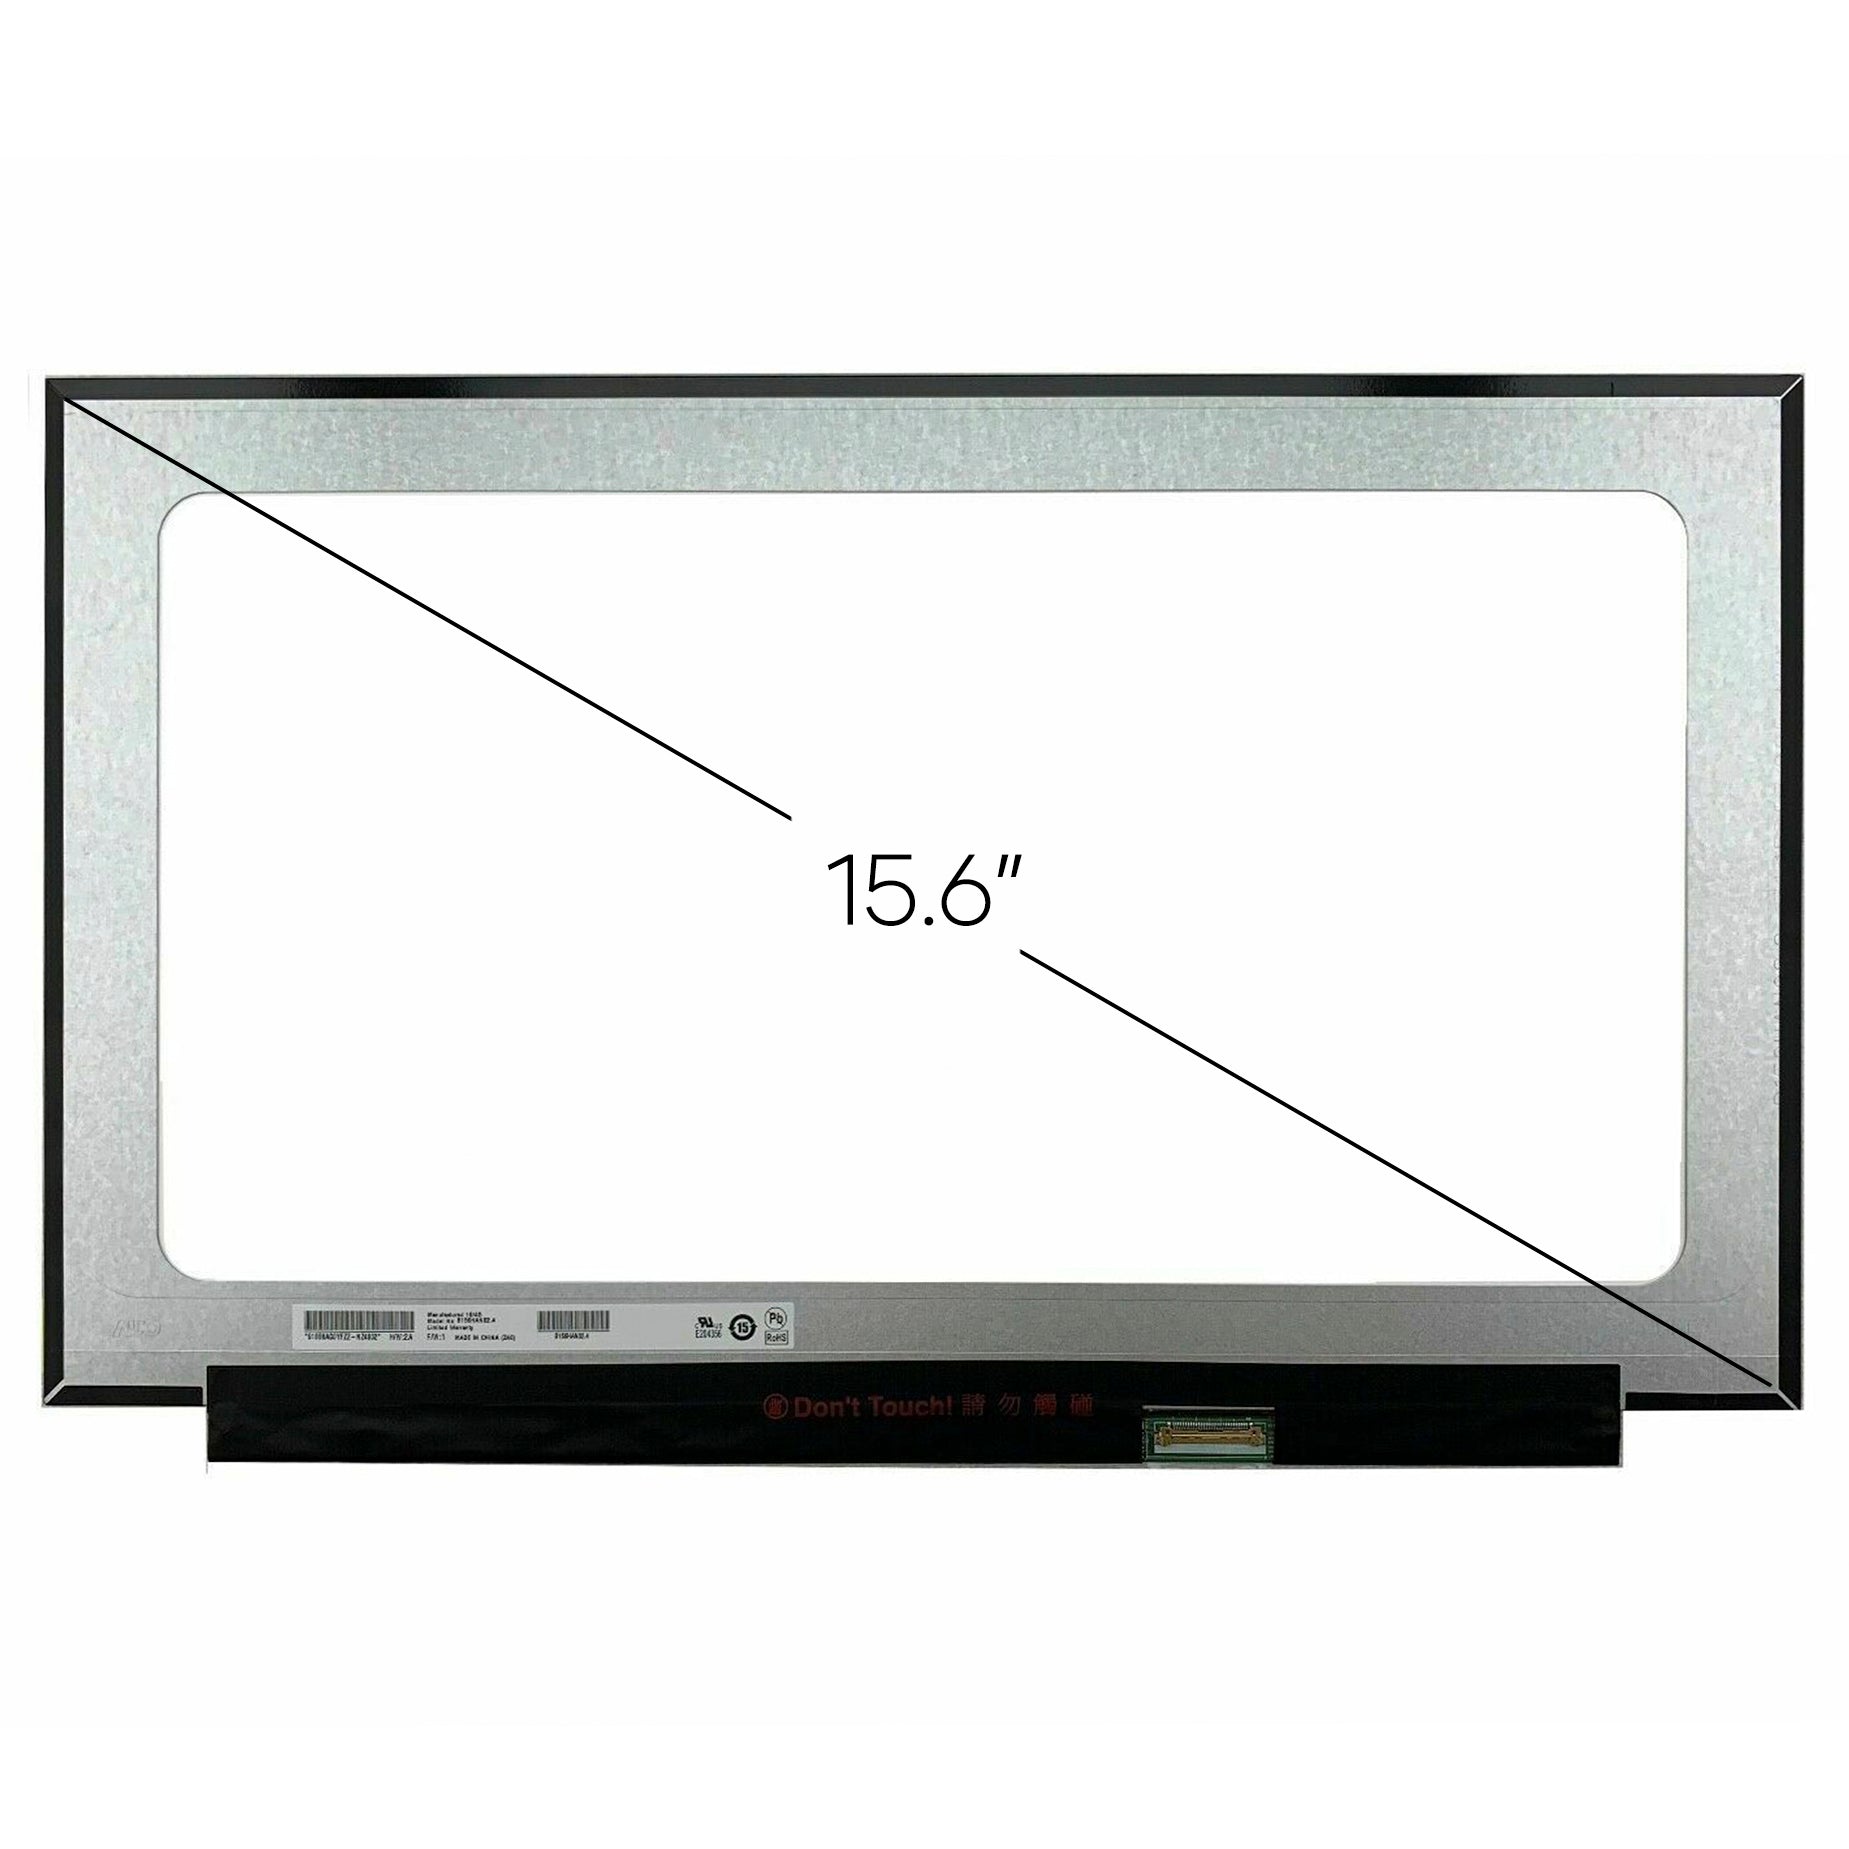 Screen Replacement for NT156WHM-N44 V8.0 HD 1366x768 Matte LCD LED Display